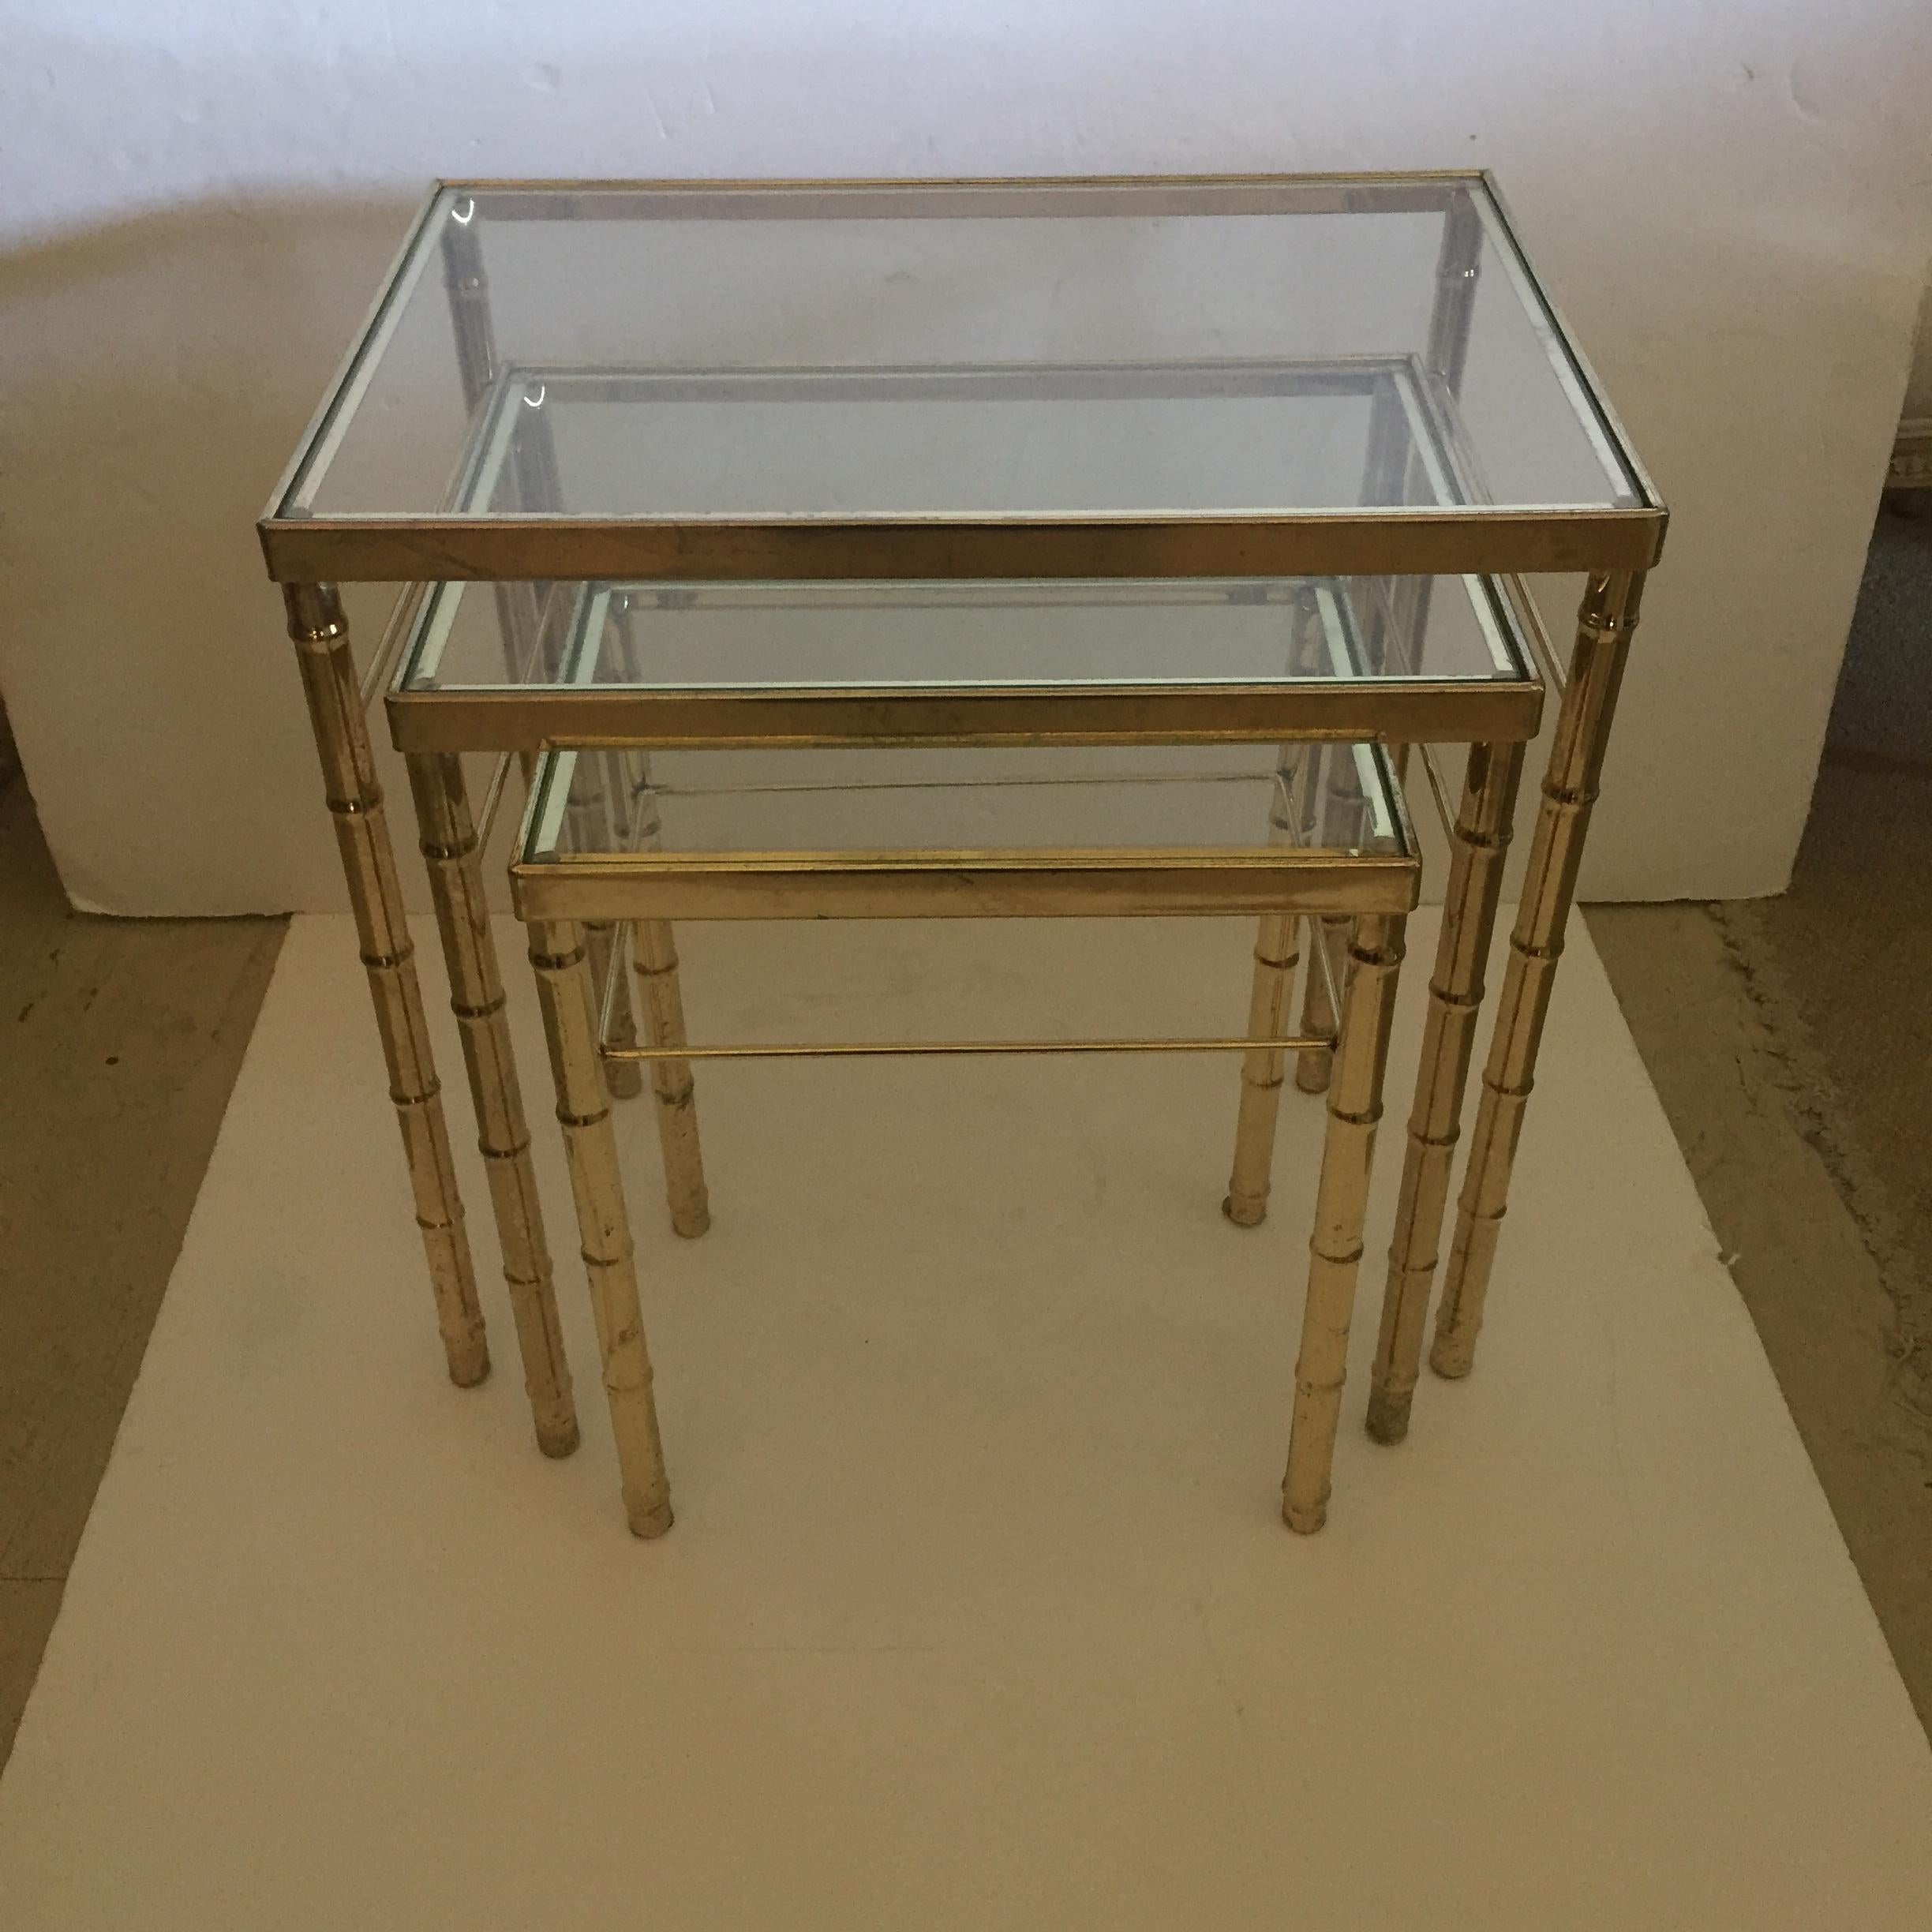 Measures: Large table
15 1/2” x 22 1/2”
Handsome set of three Mid-Century Modern nesting tables with faux bamboo style brass legs and glass tops in graduated sizes.
Measures: Medium table
19 high 12 1/2 x 18 1/2
Small table
17 high 9 1/2 x 14